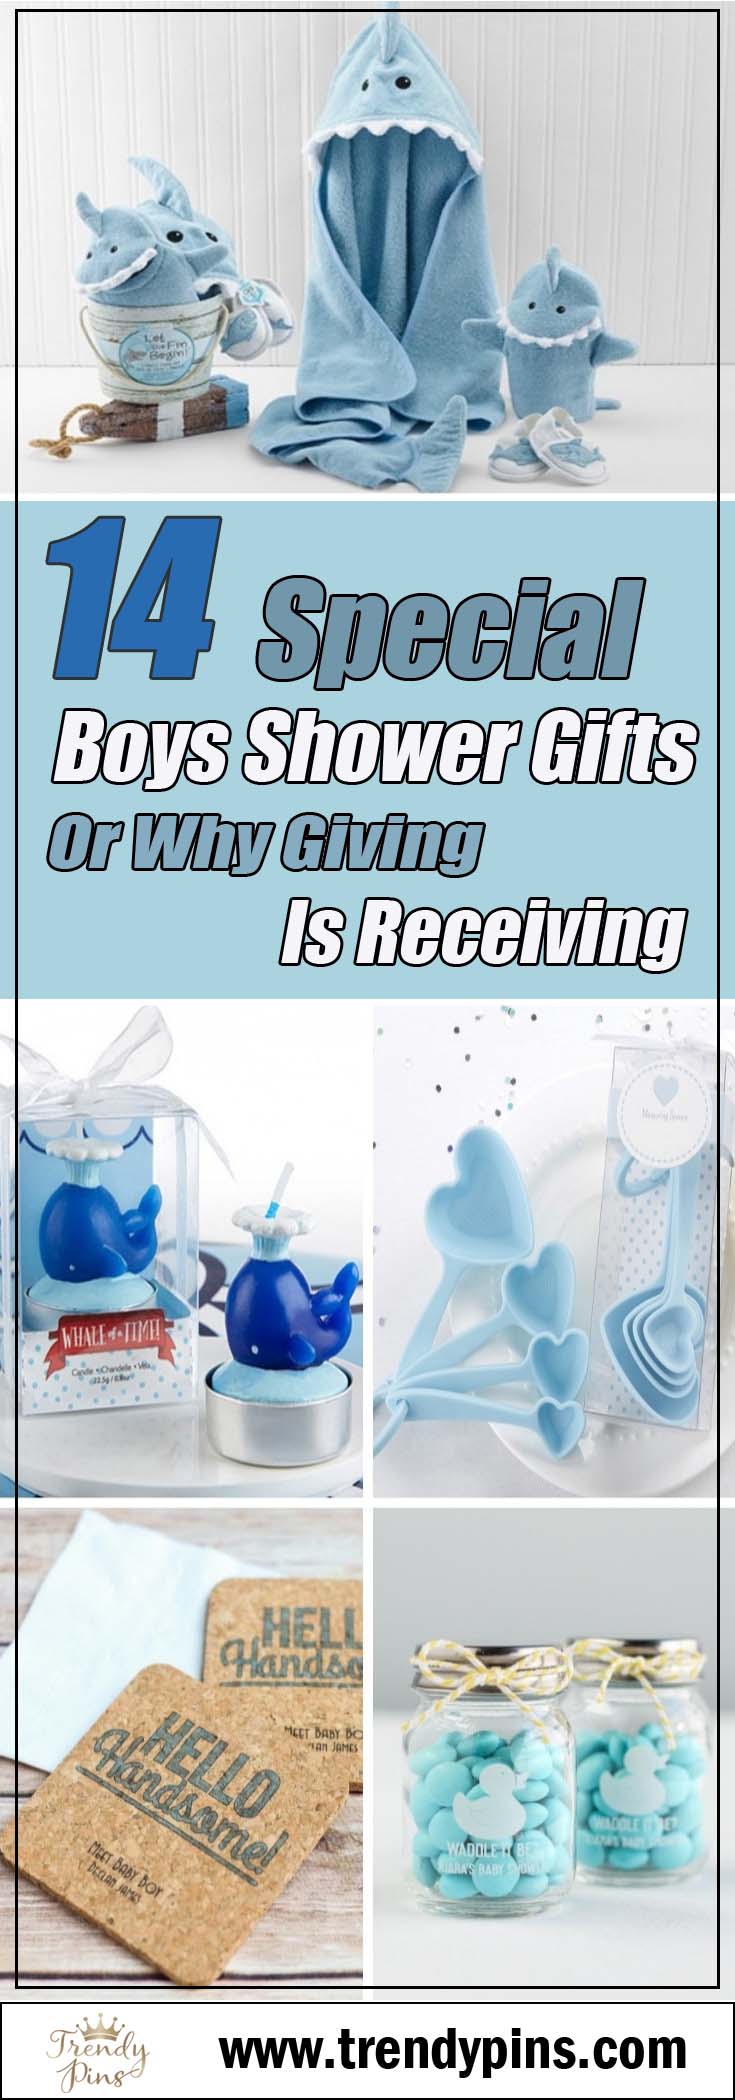 14 special boys shower gifts or why giving is receiving